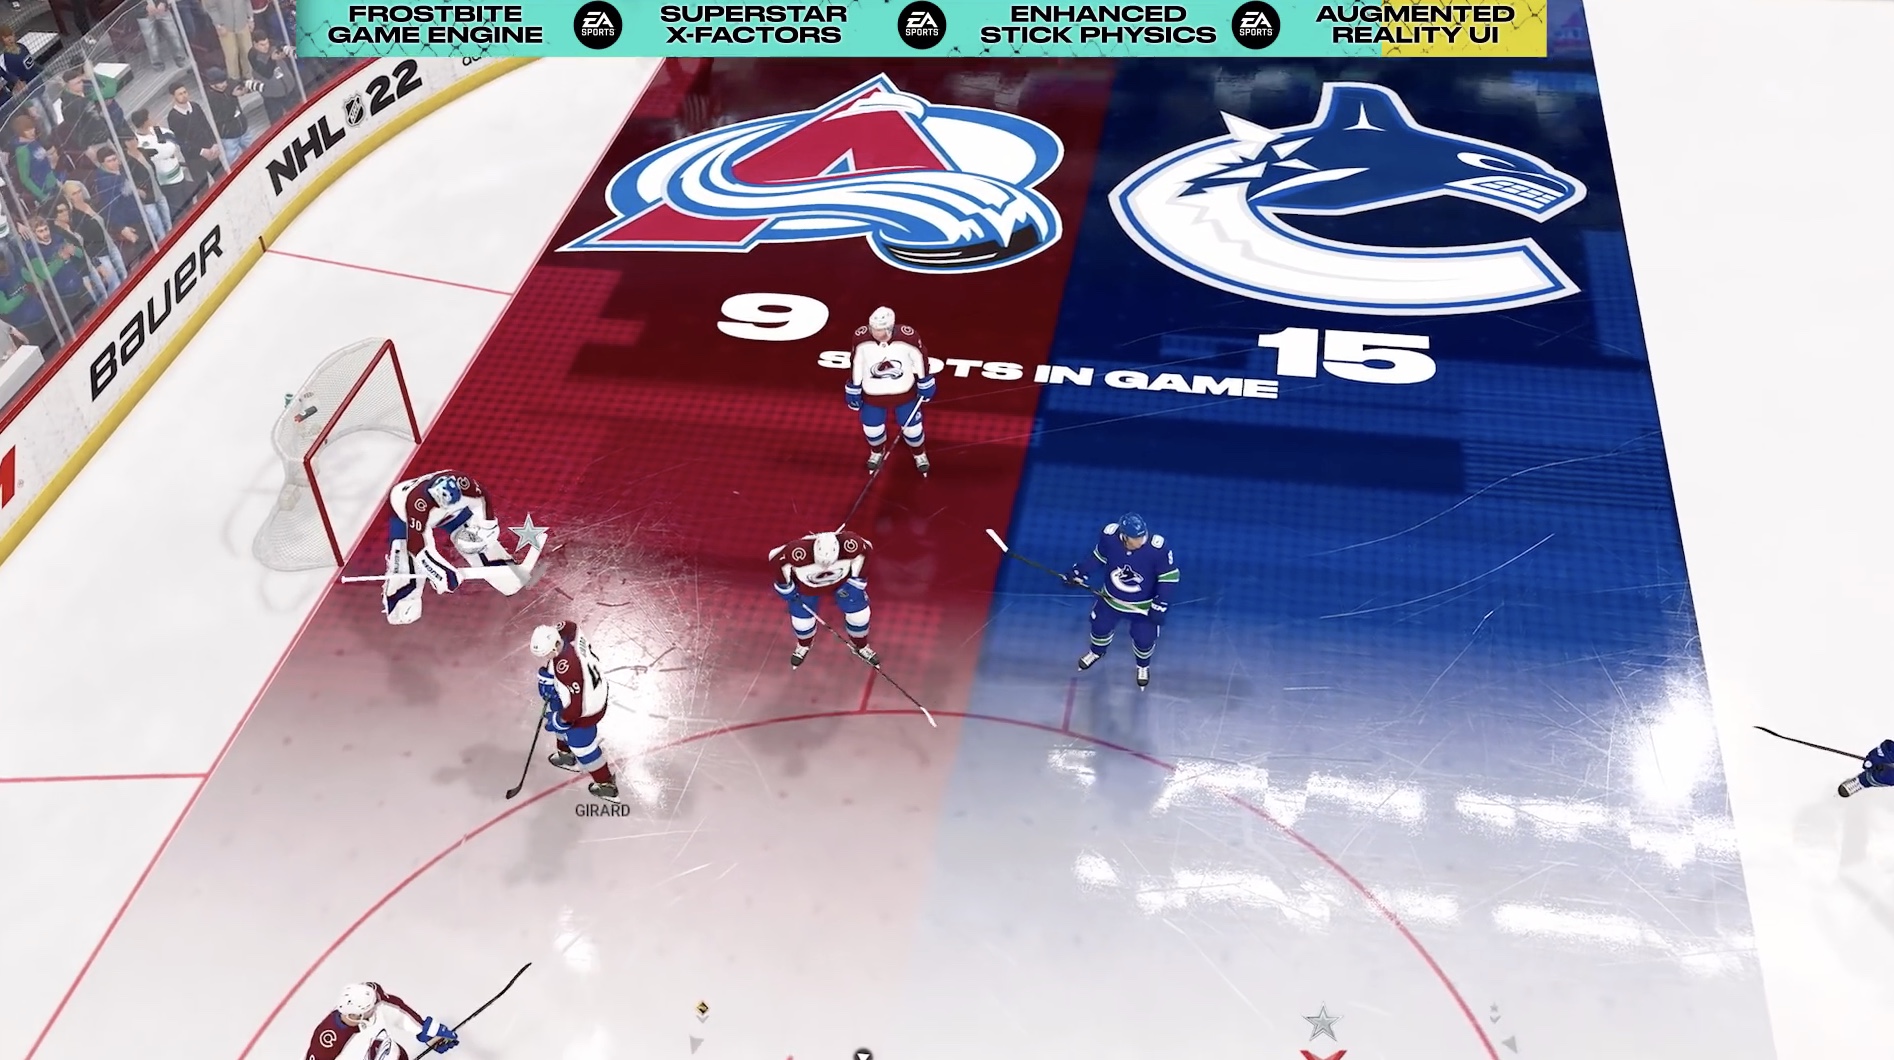 NHL 22: Initial Thoughts from the Uncut Gameplay Footage - The